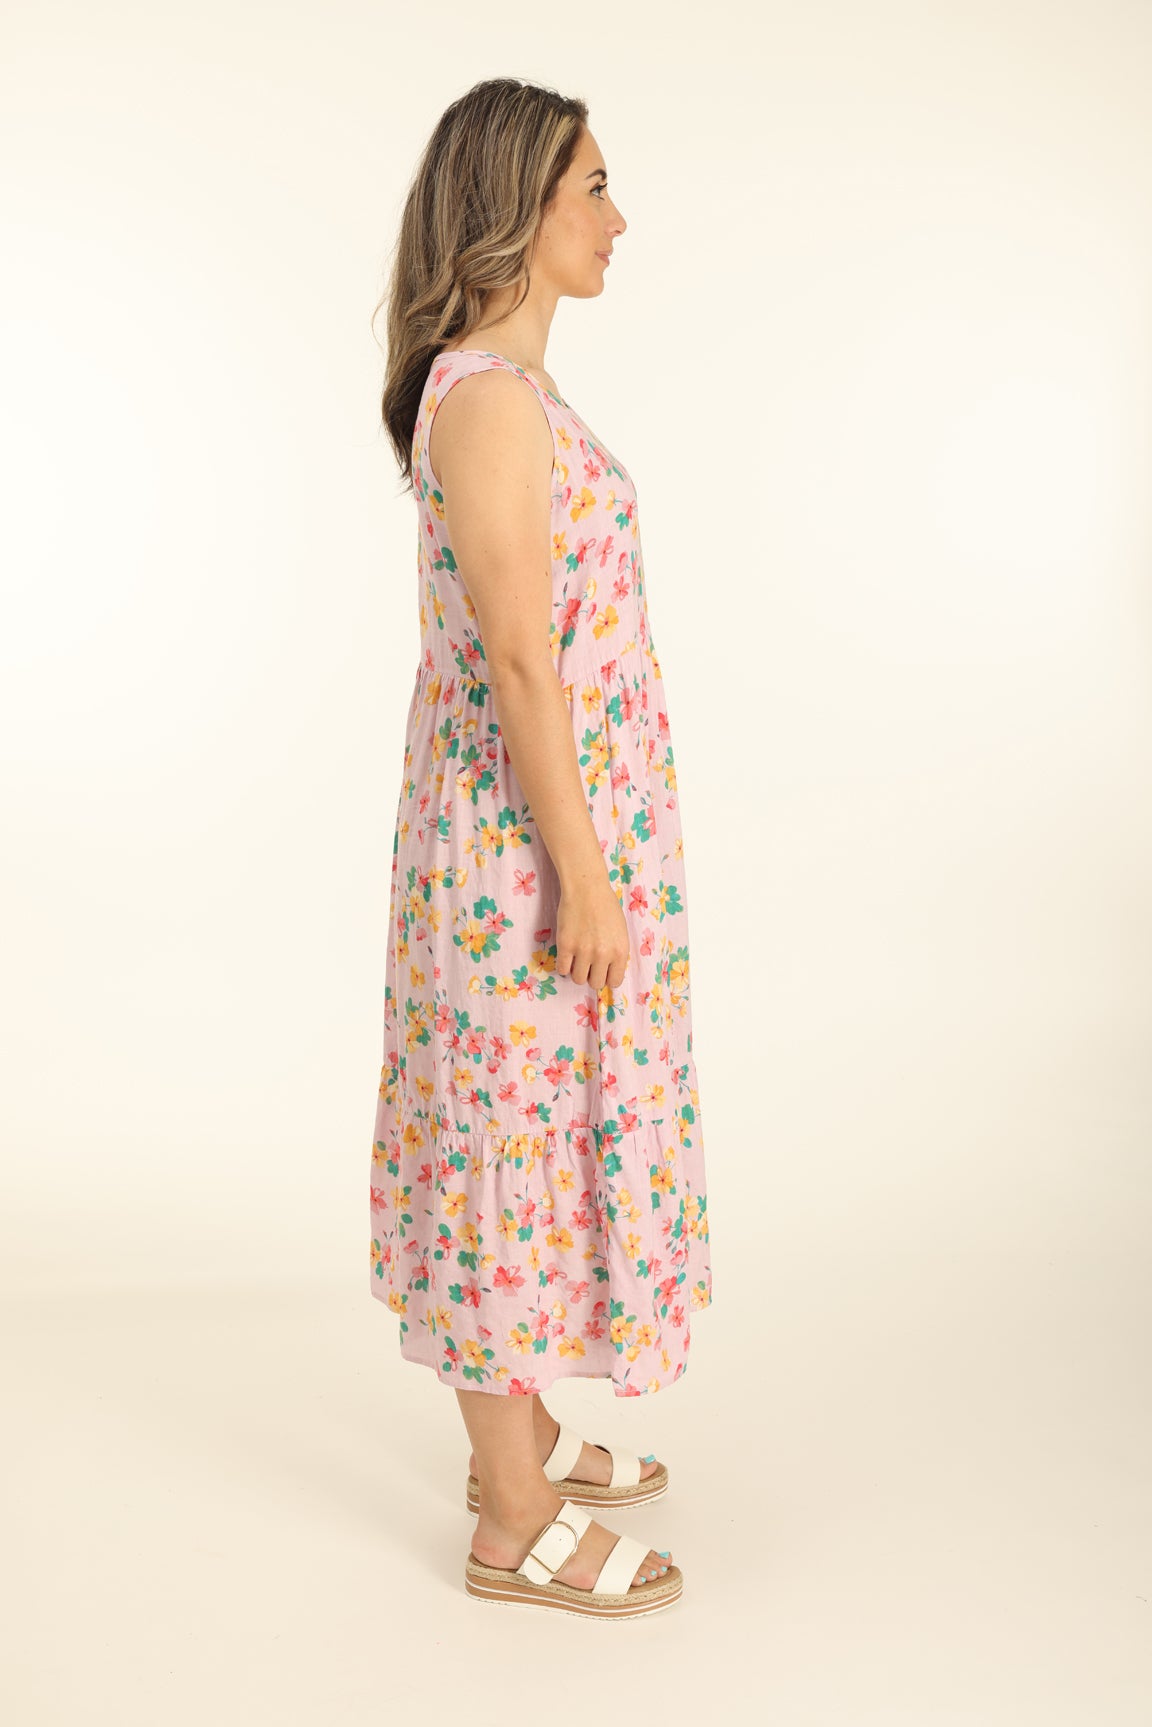 Printed Rayon Cotton Dress in Pink